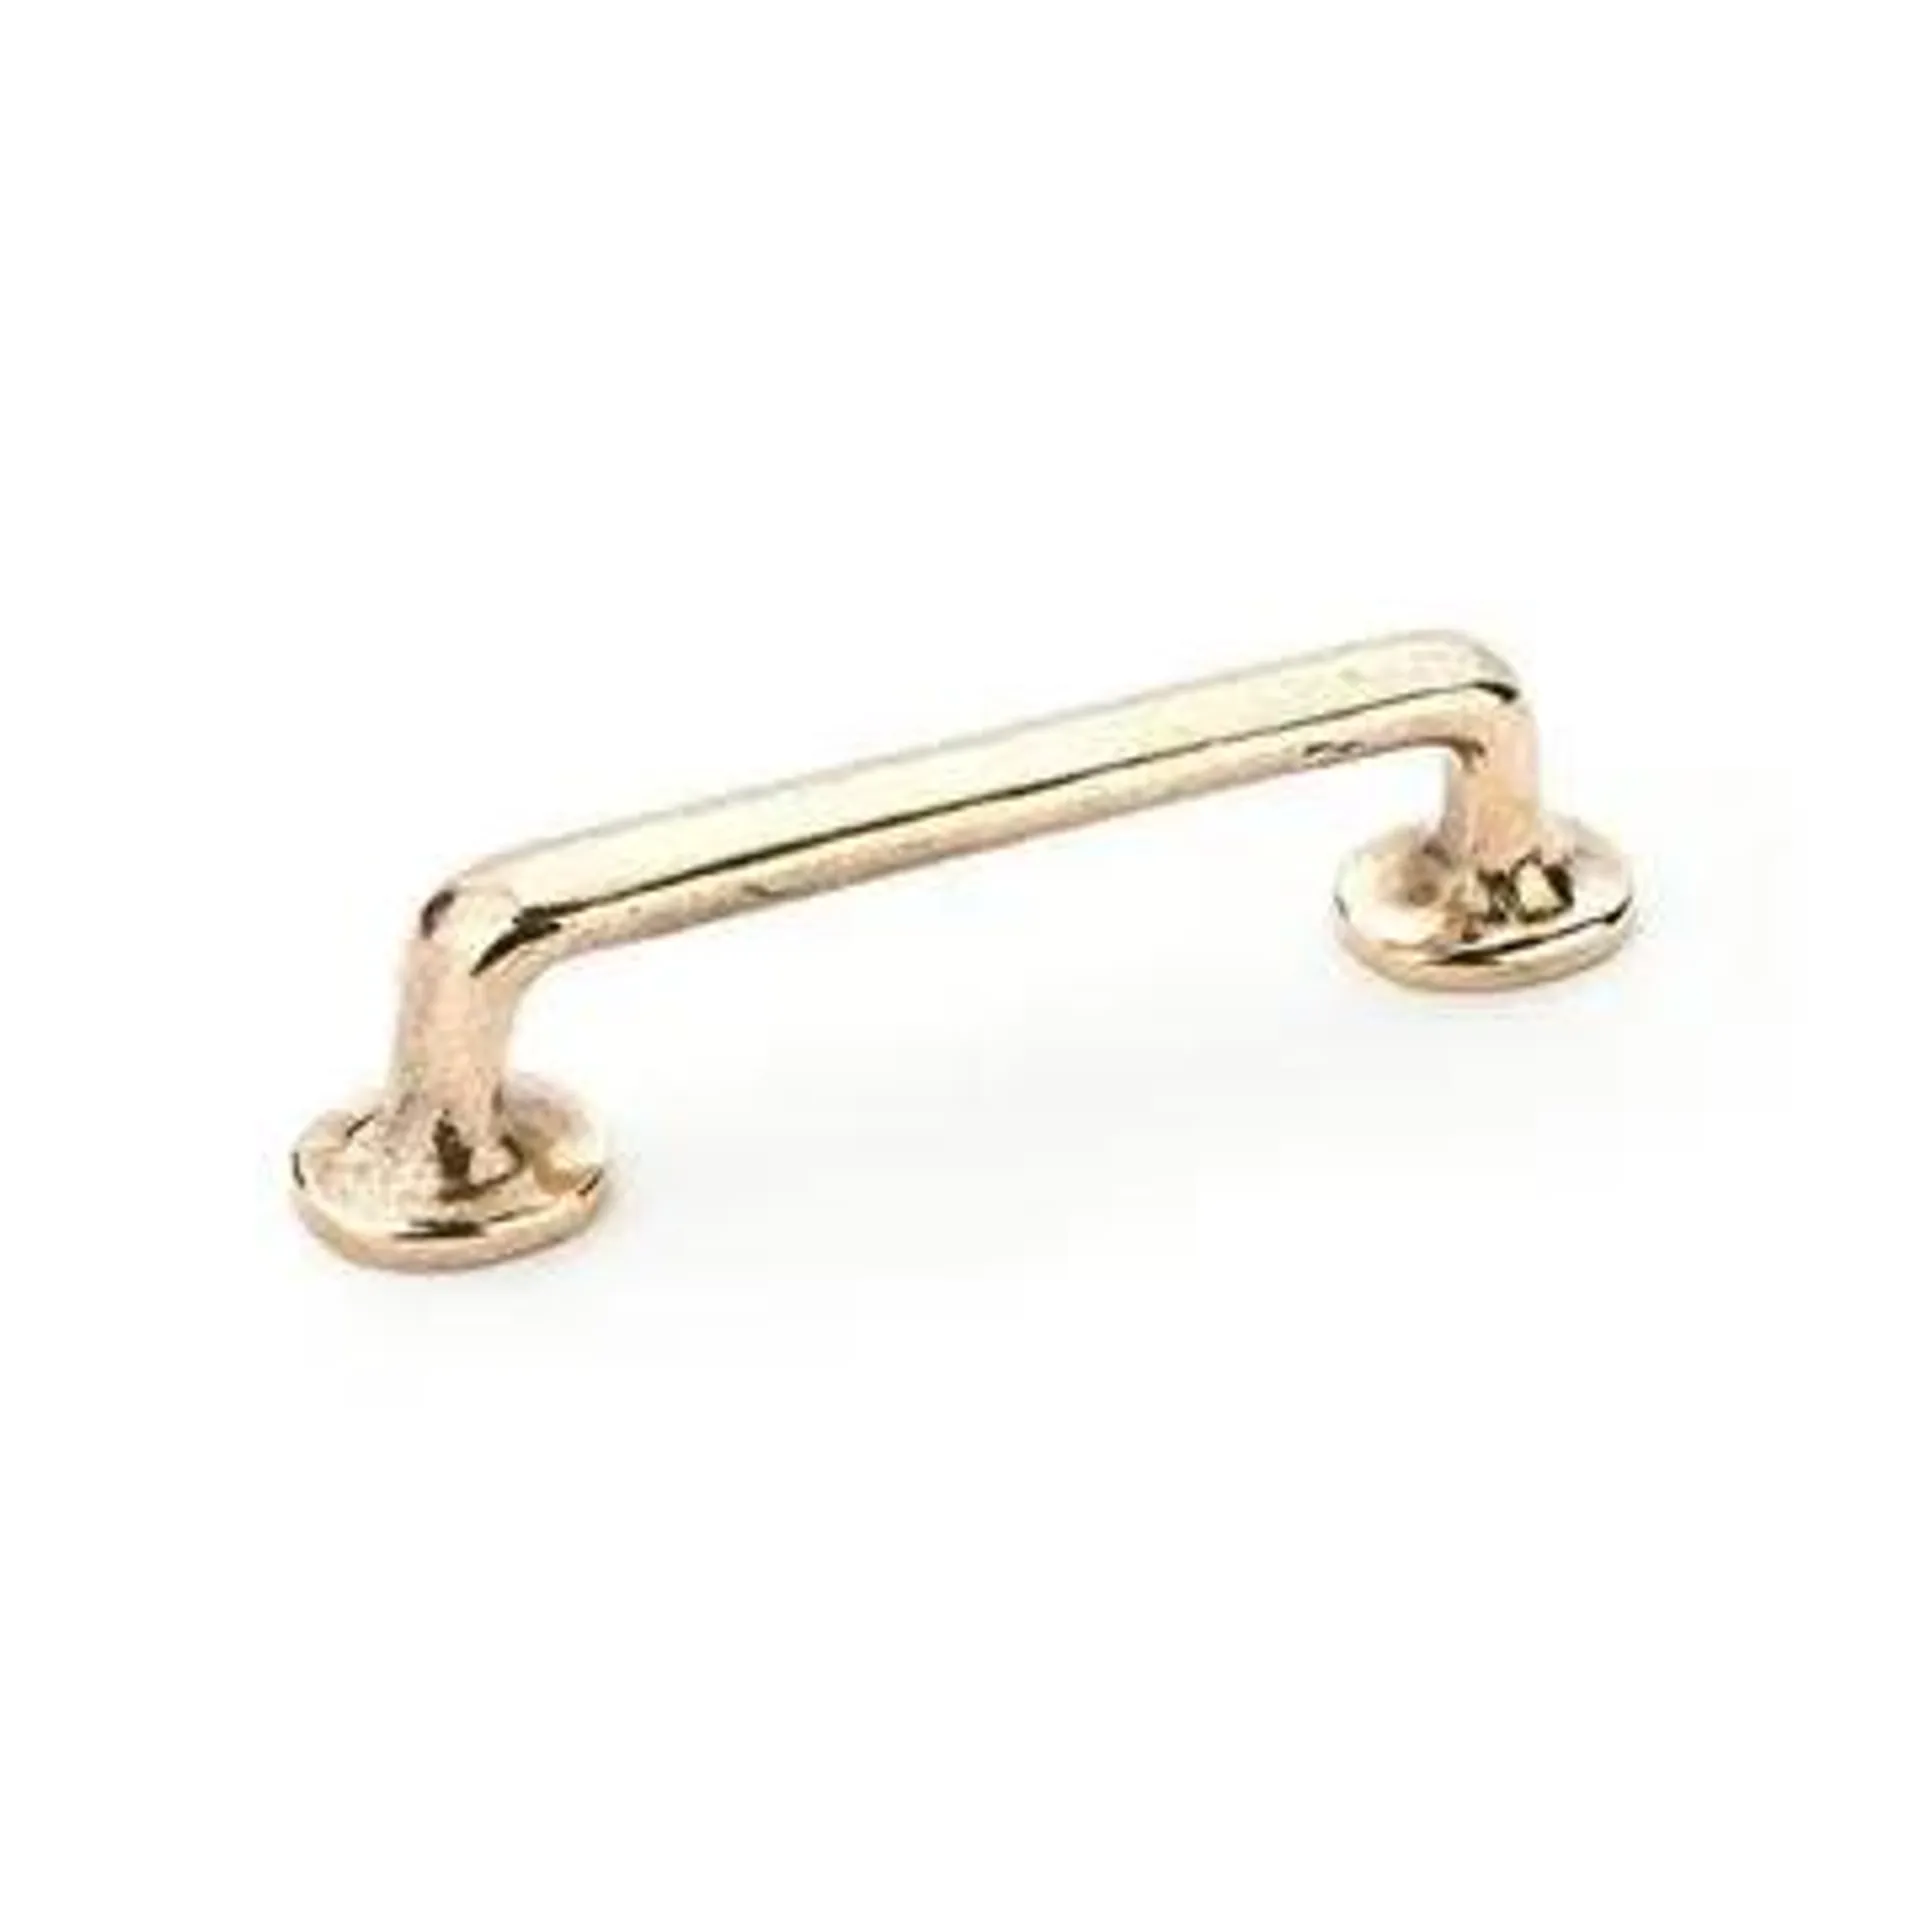 Schaub Mountain Rounded 4 Inch Cabinet Pull